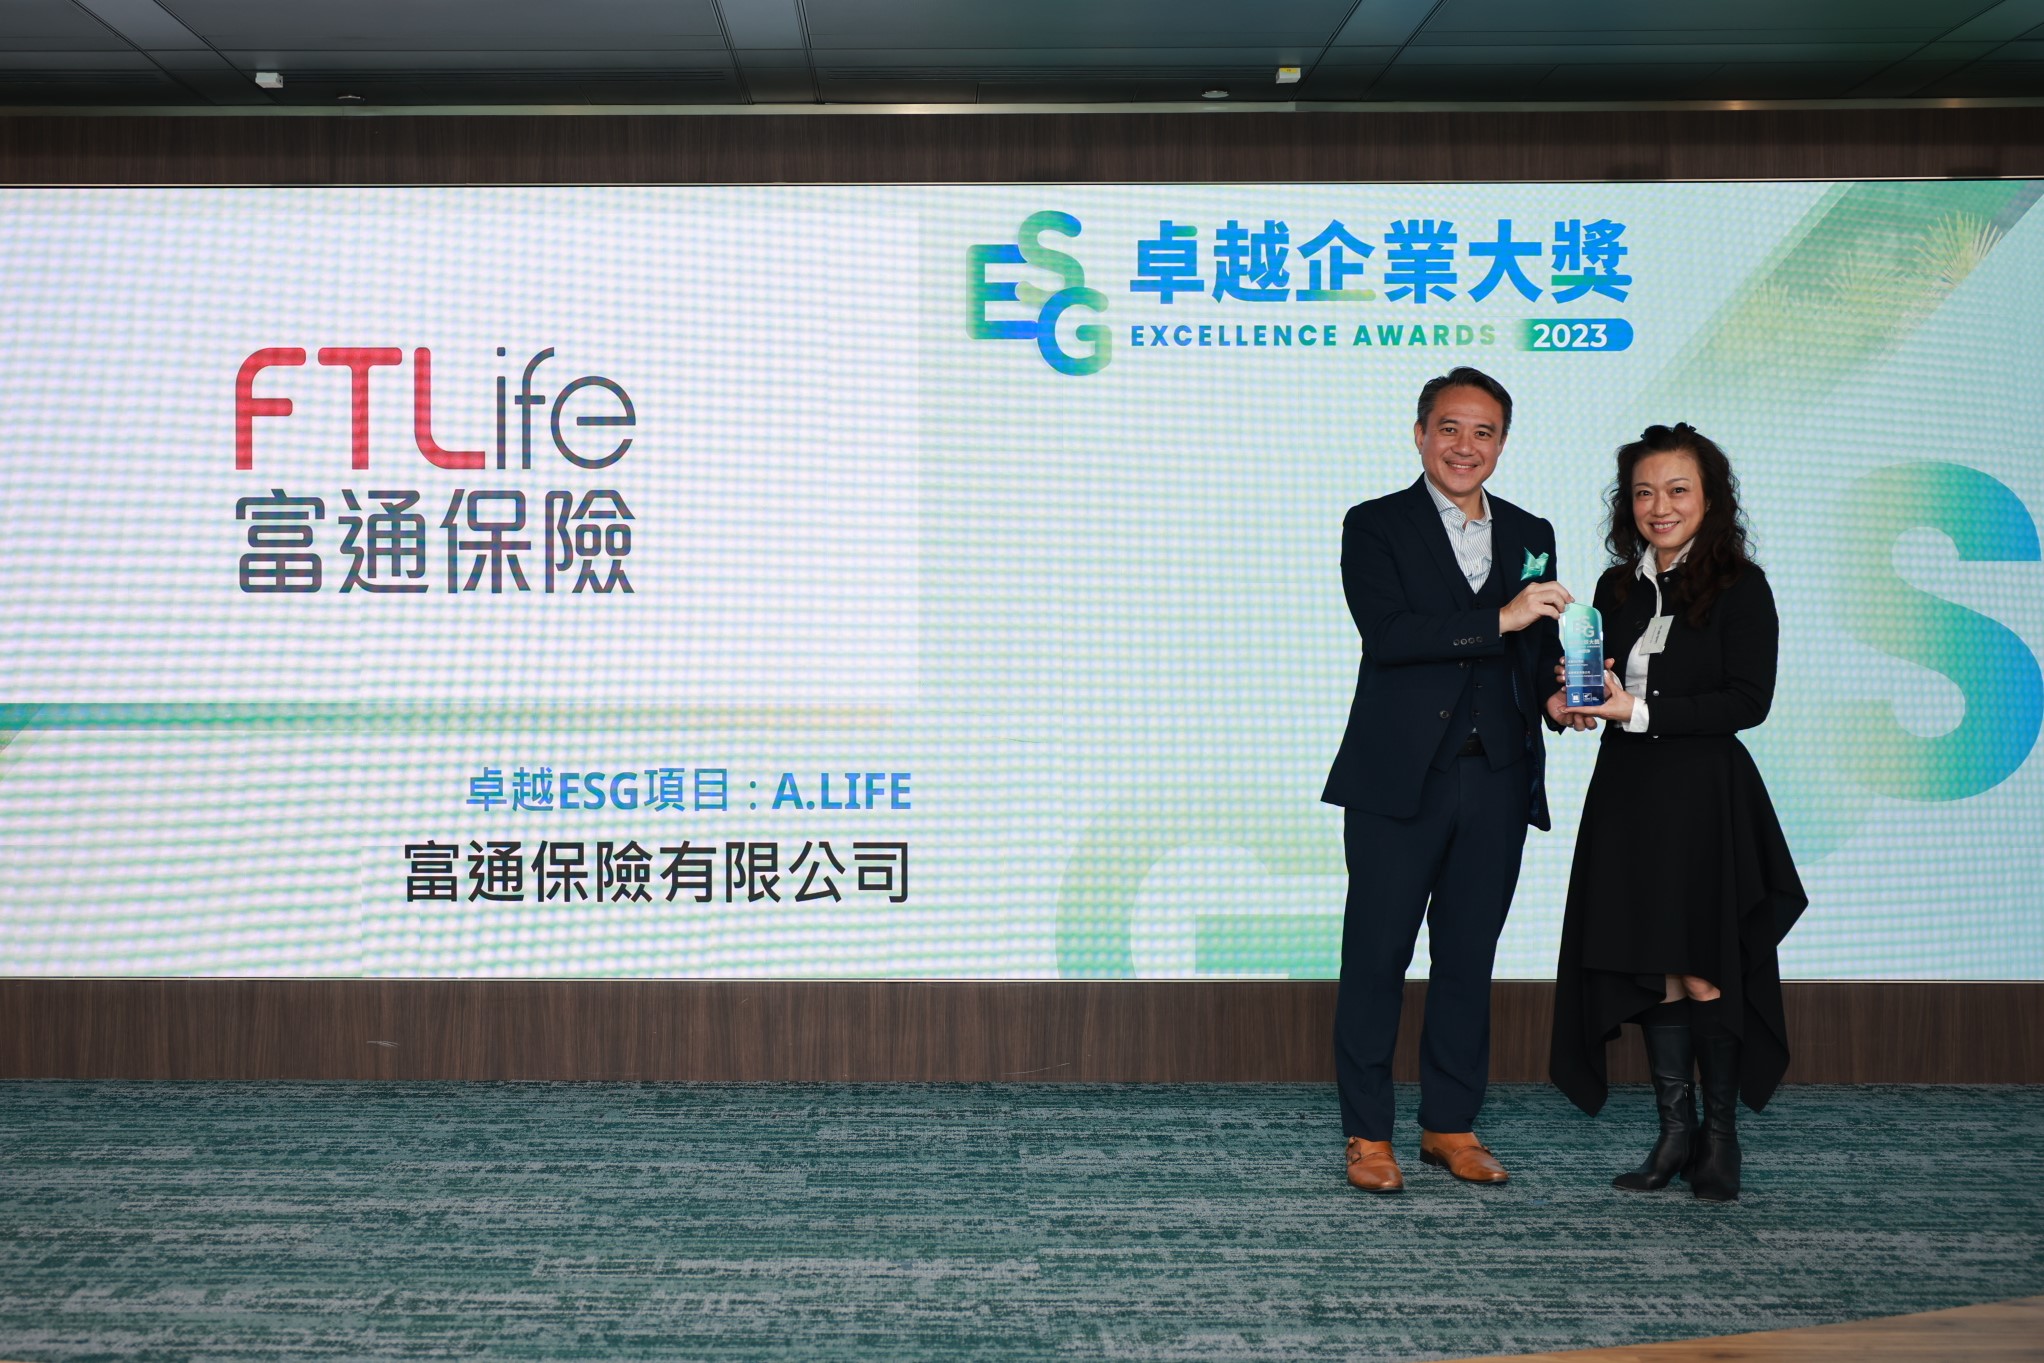 FTLife won the "ESG Excellence Awards 2023" while striding into a sustainable future!